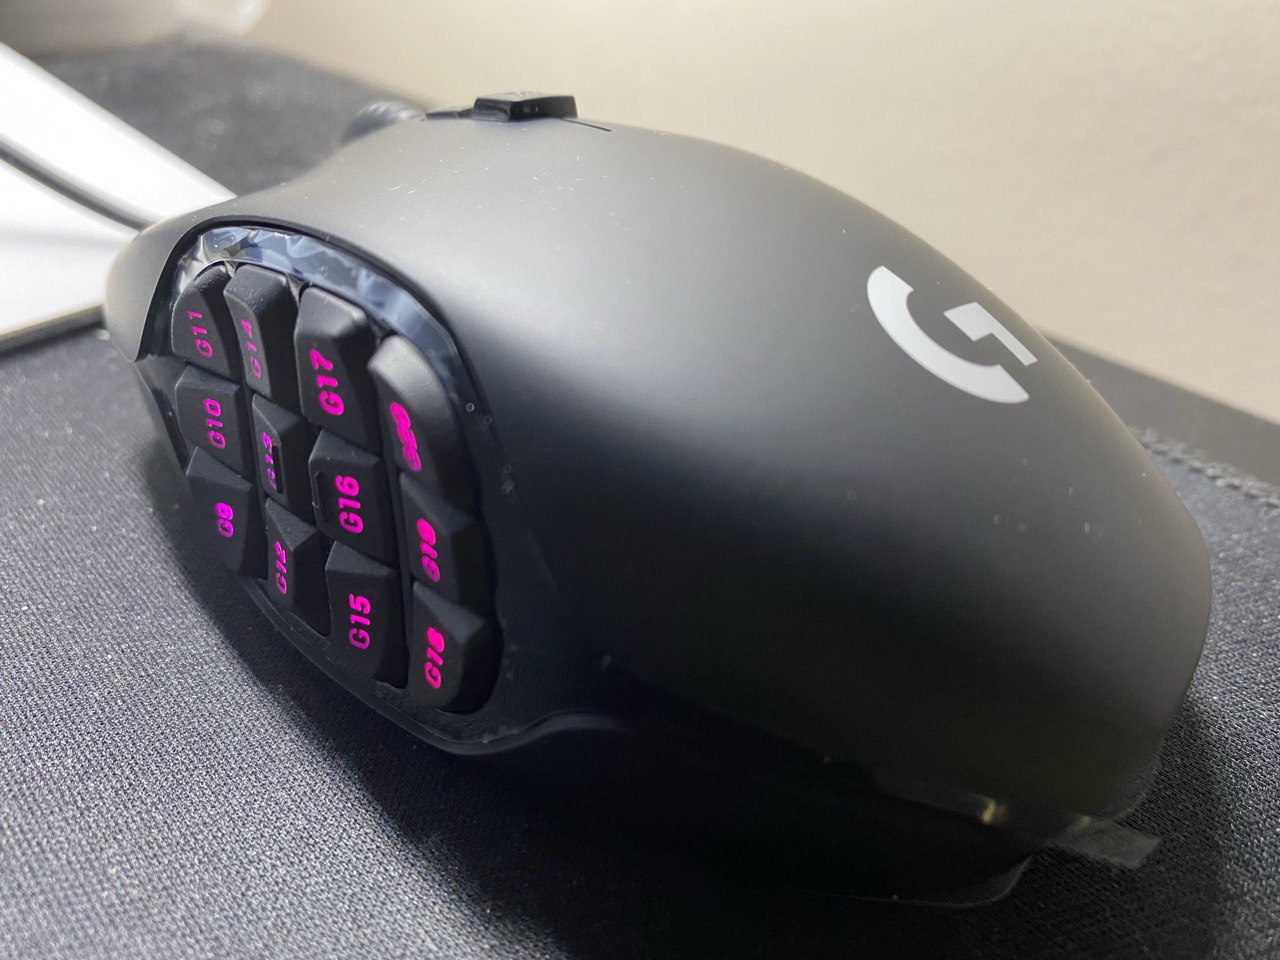 Pros and Cons of the Logitech G600 MMO Gaming Mouse details 2